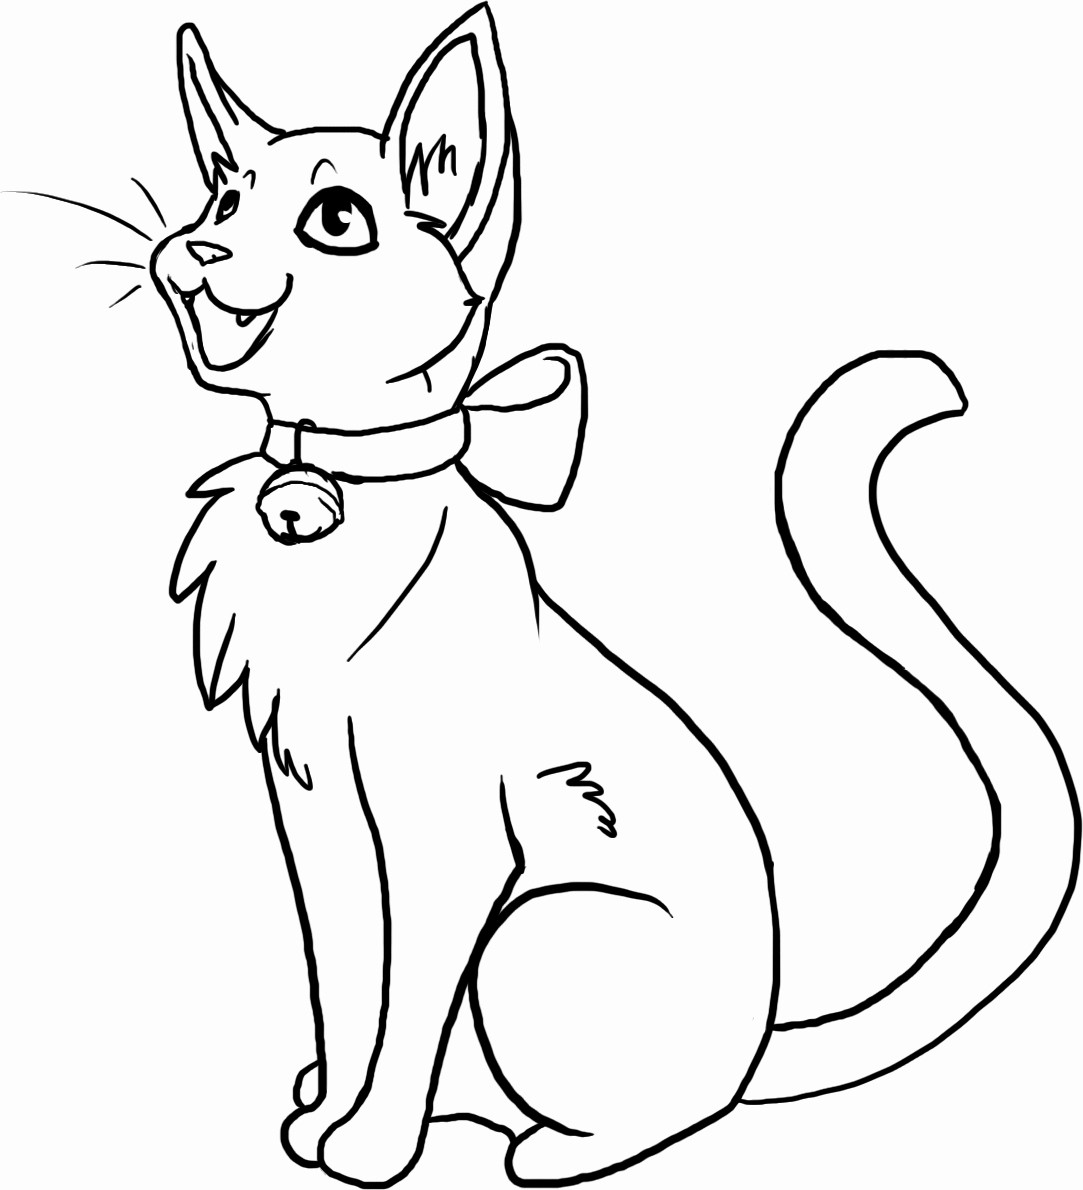 Warrior Cat Coloring Pages To Print at Free